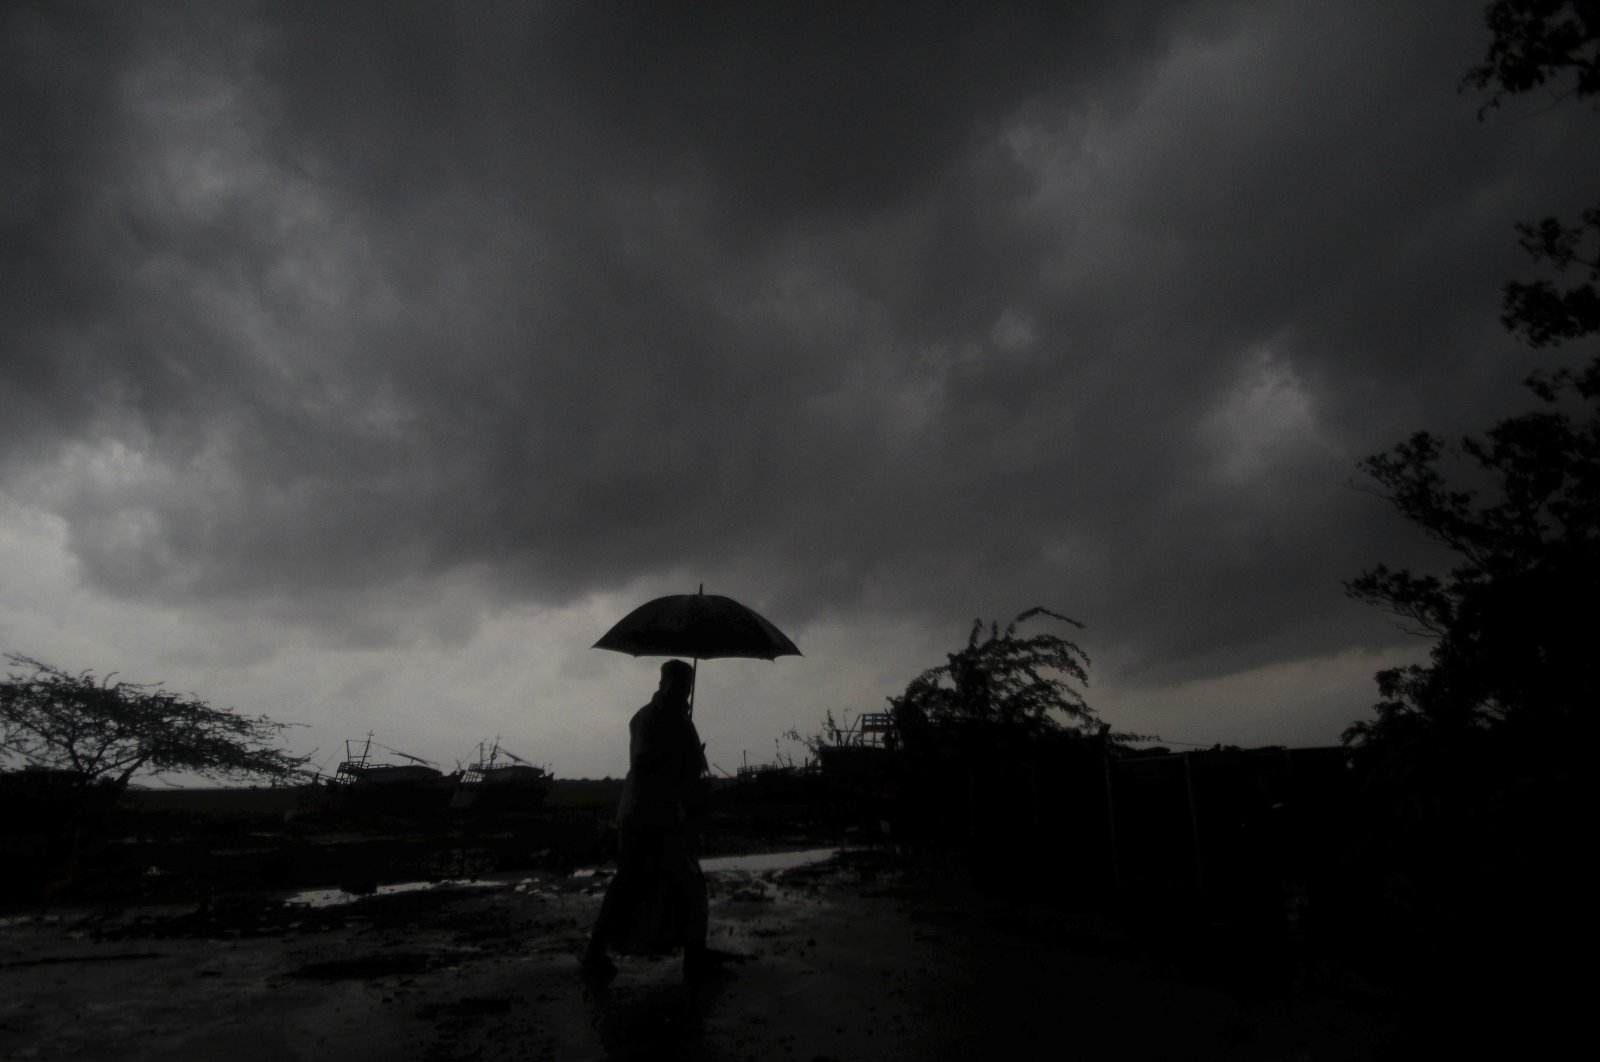 A villager walks holding an umbrella as dark clouds loom overhead in Balasore district in Odisha, India, Tuesday, May 25, 2021. (AP Photo)